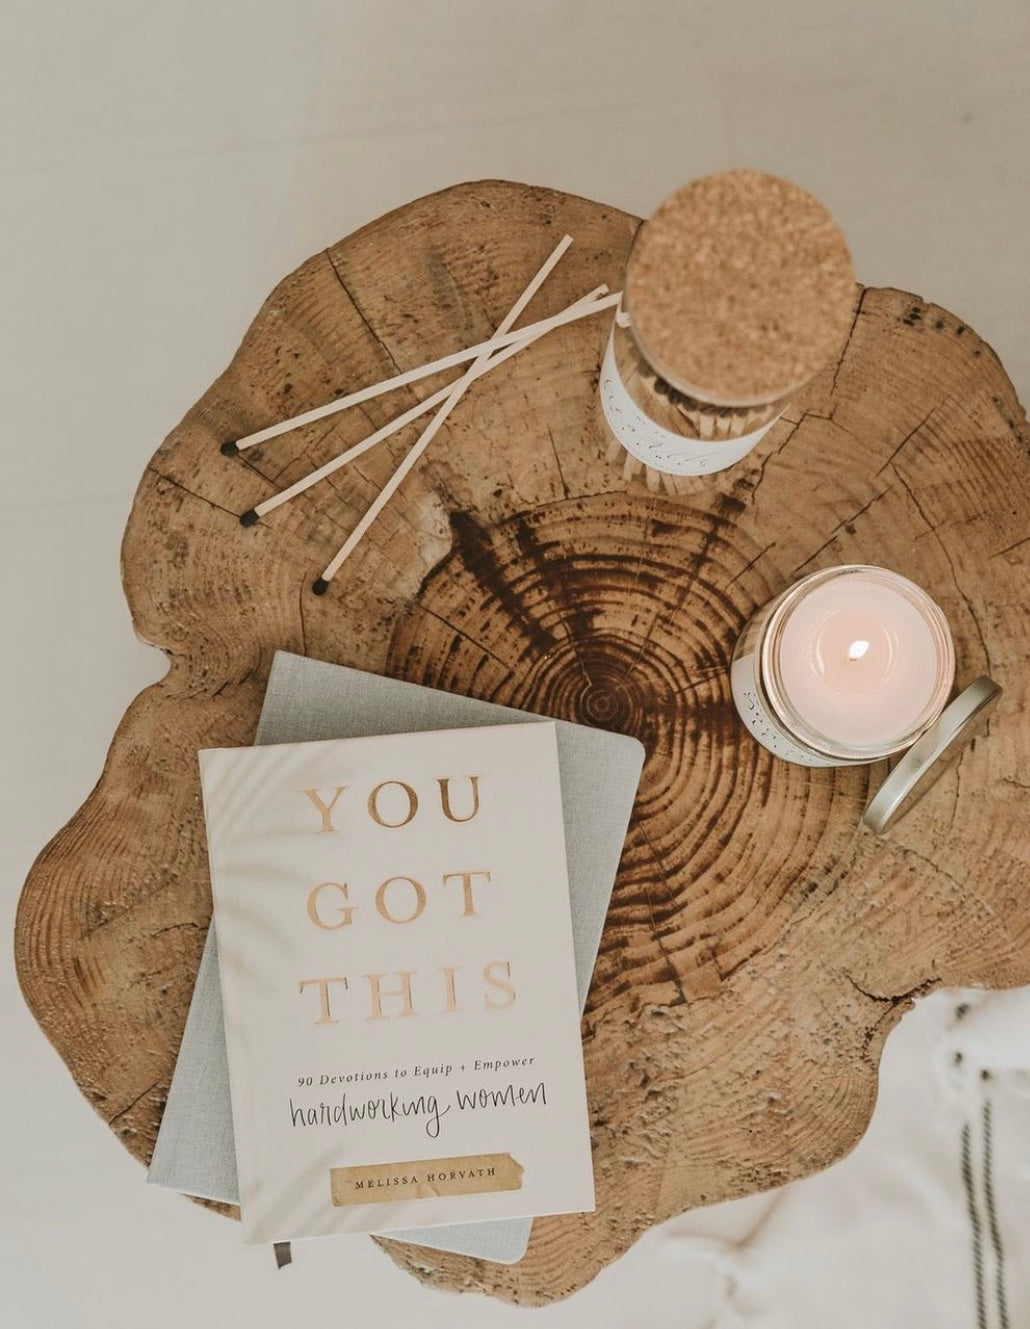 YOU GOT THIS: 90 DEVOTIONS TO EMPOWER HARDWORKING WOMEN